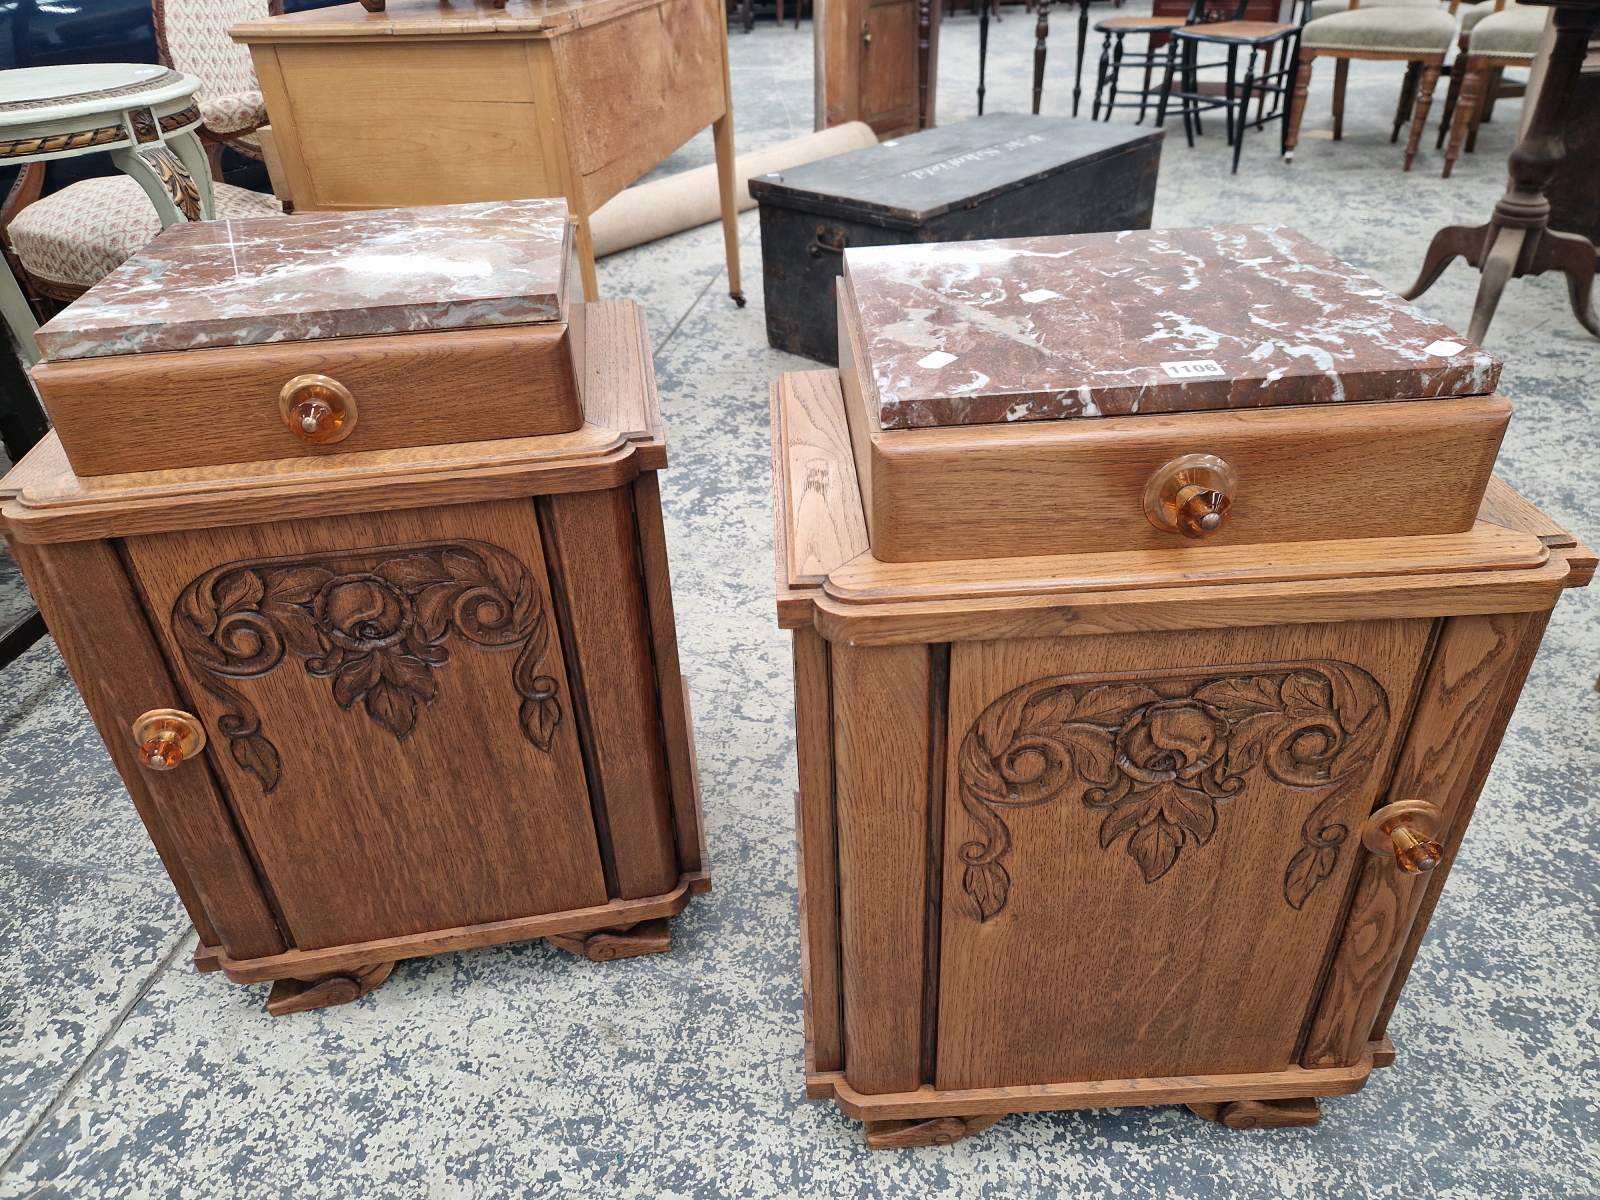 A PAIR OF OAK AND MARBLE TOPPED ART DECO BEDSIDE CABINETS. - Image 2 of 5